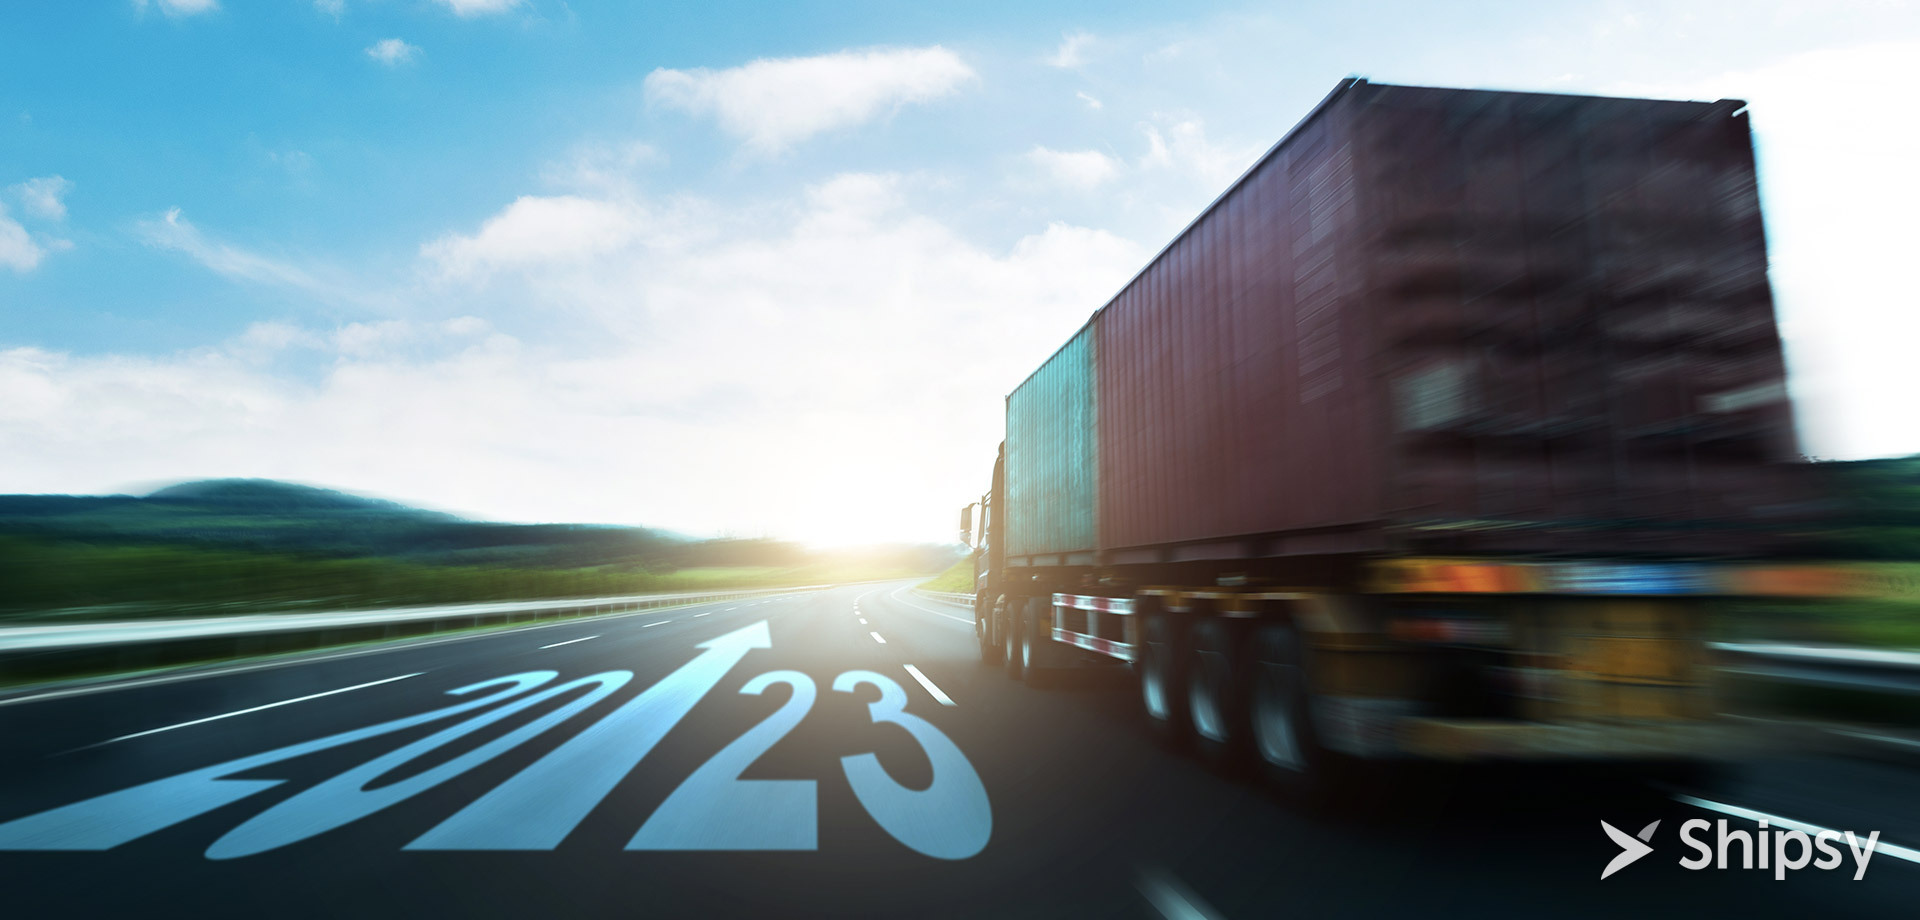 Top 6 Supply Chain Trends To Look Out For In 2023